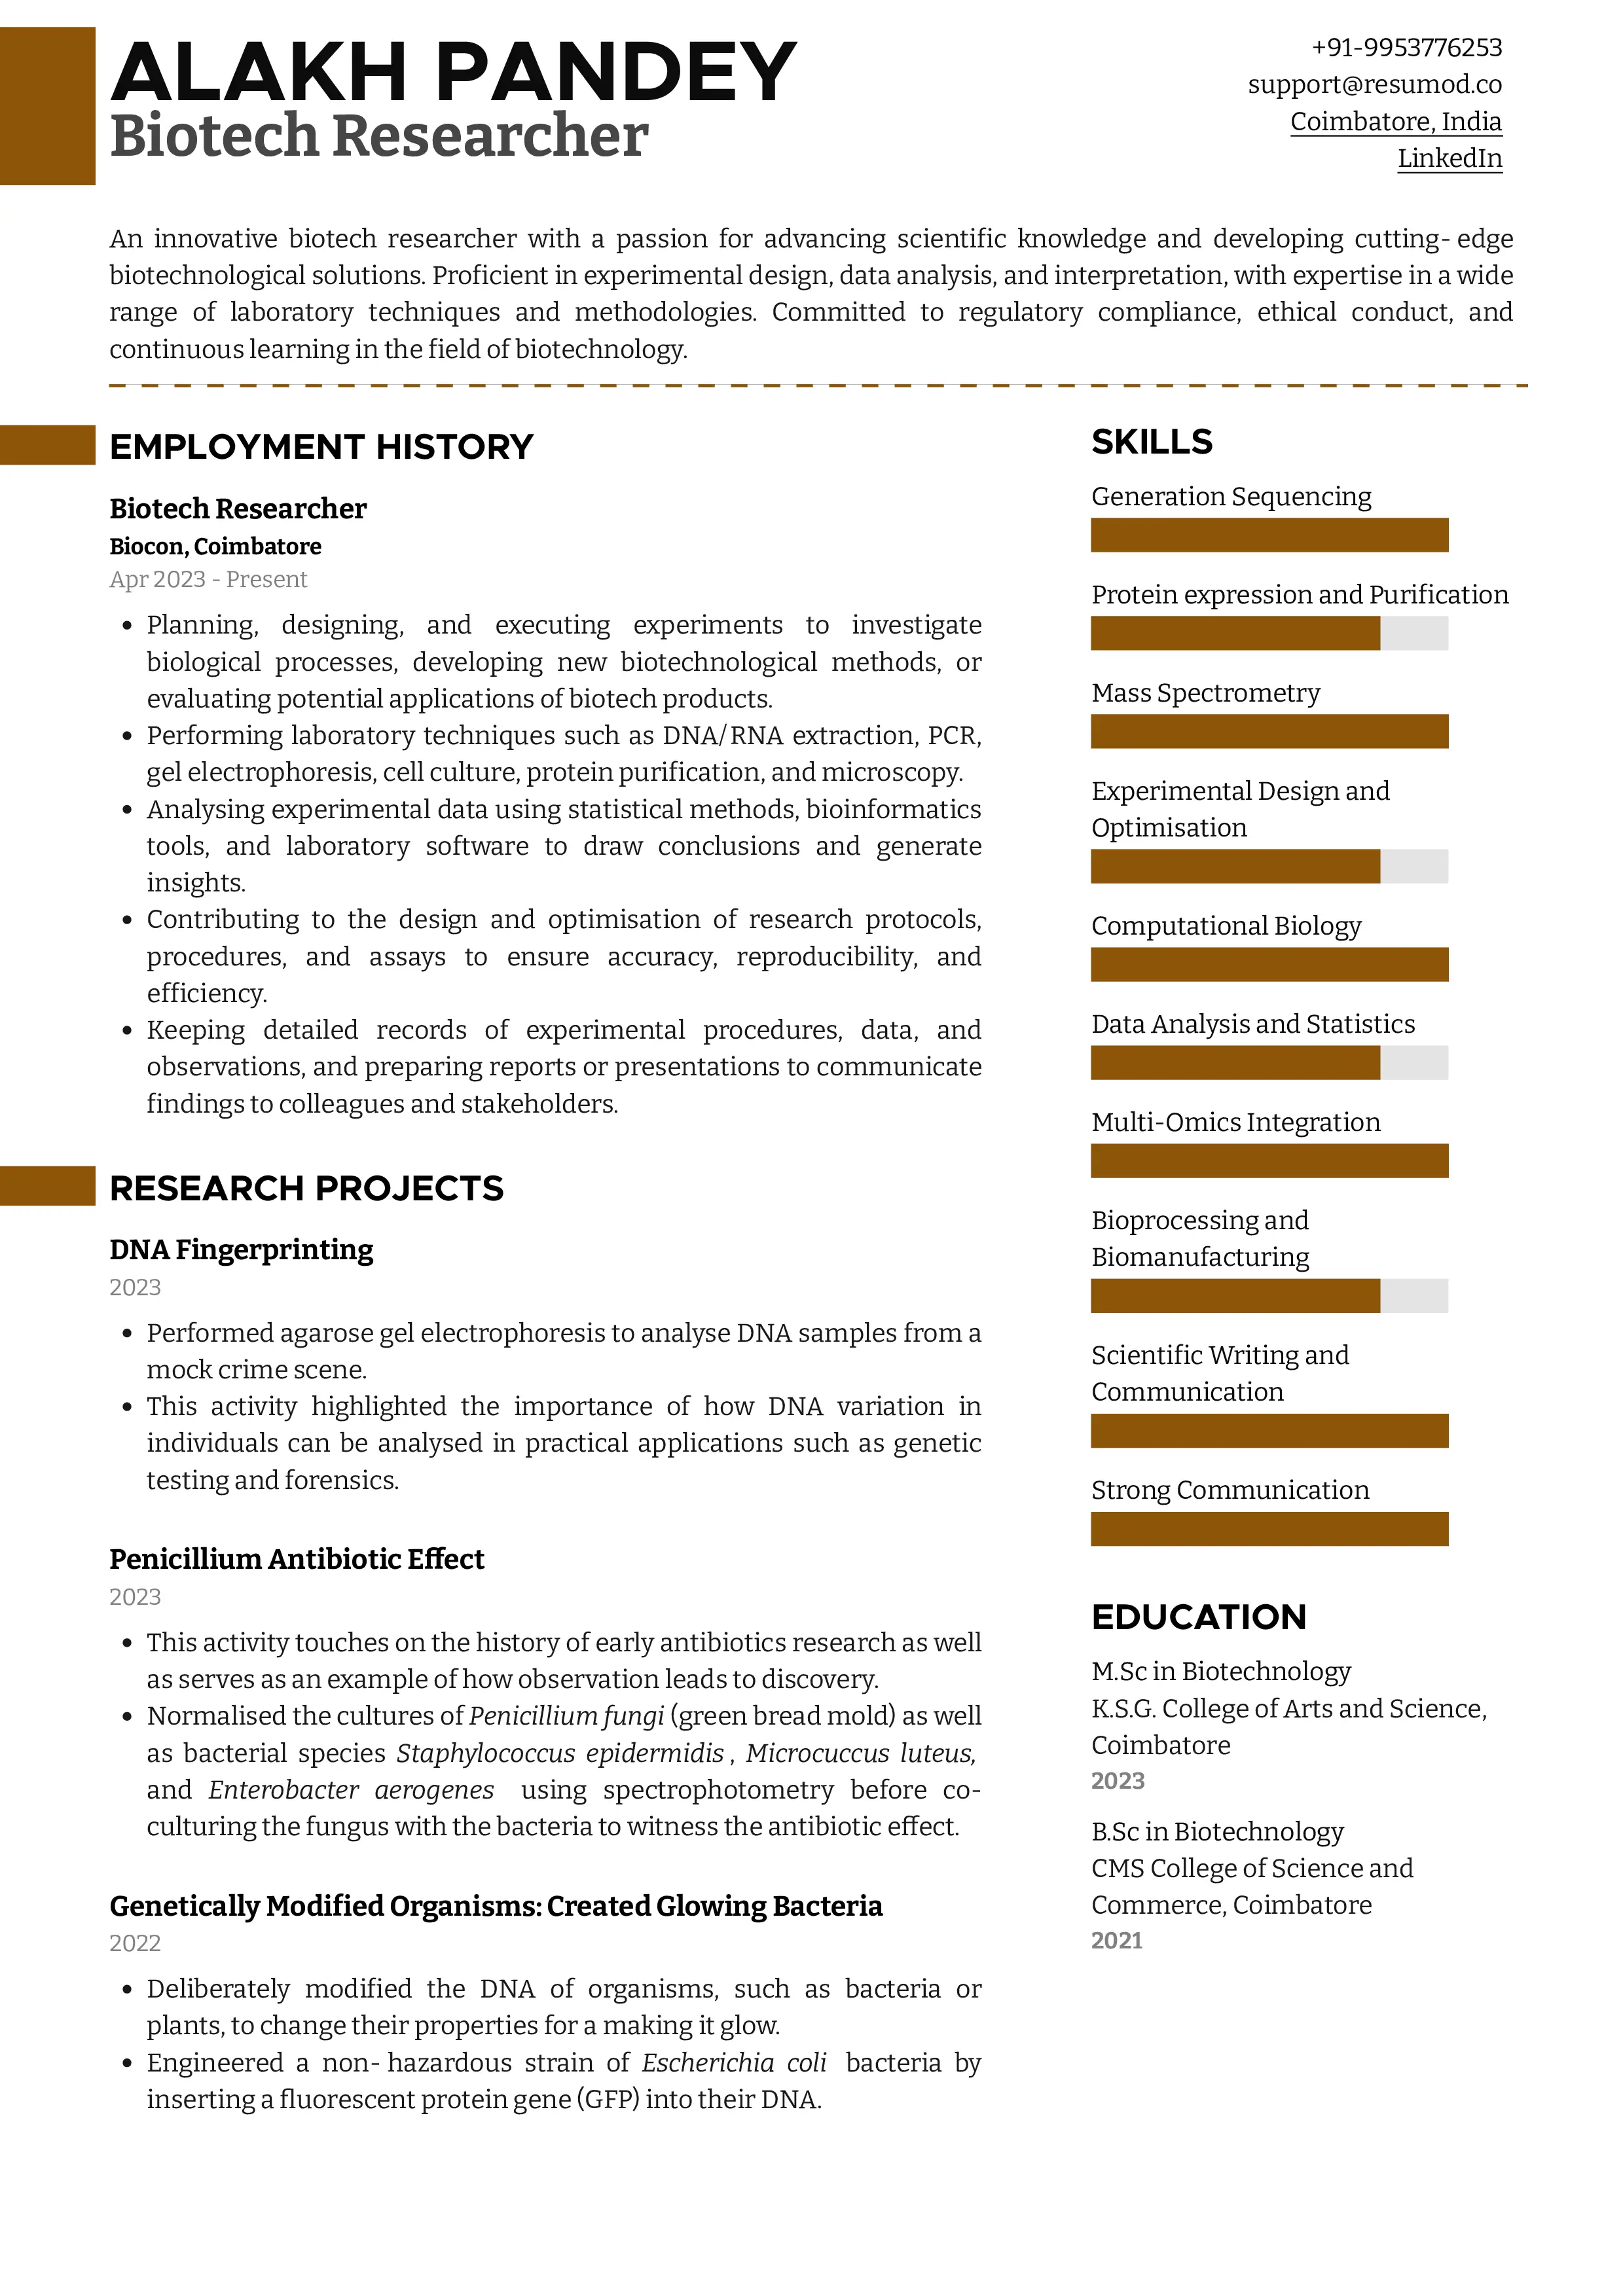 Sample Resume of Biotech Researcher | Free Resume Templates & Samples on Resumod.co